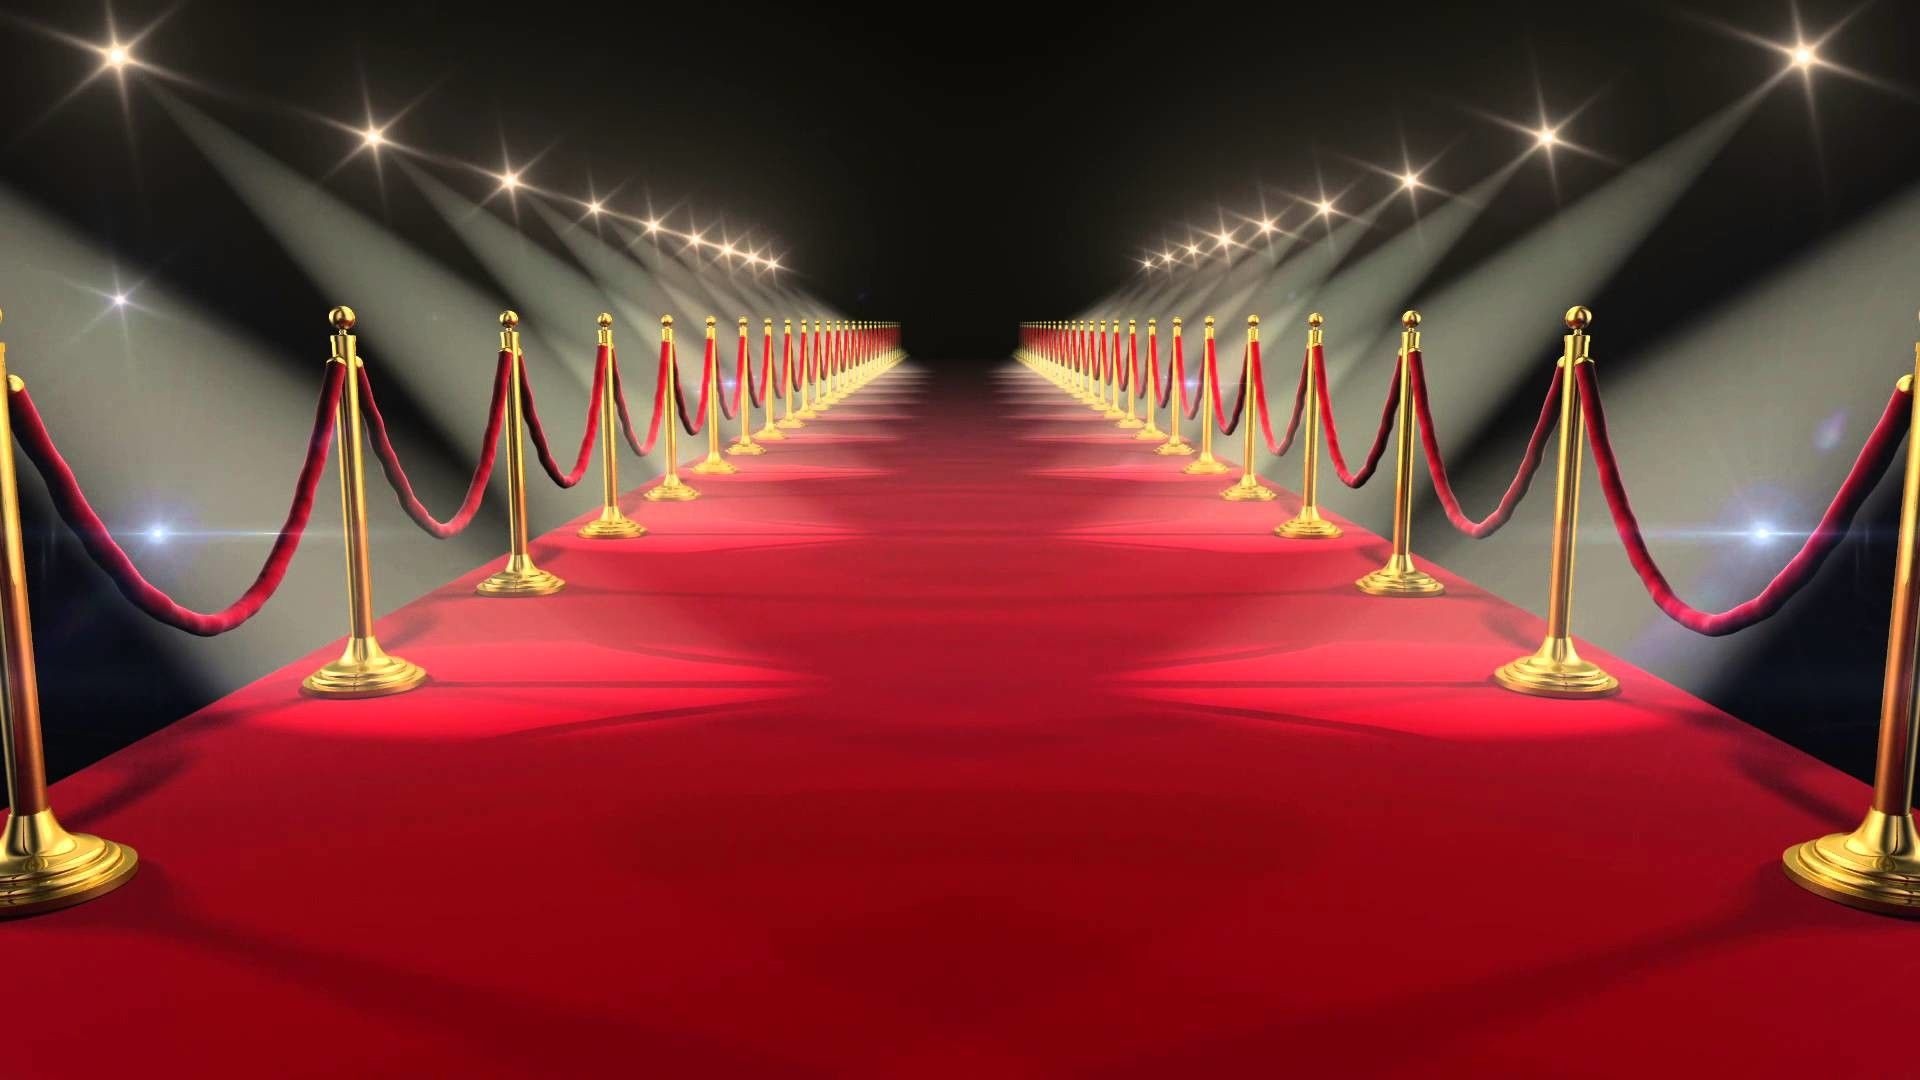 Red carpet wallpapers, Glamorous backgrounds, Celebrity fashion, Star-studded events, 1920x1080 Full HD Desktop